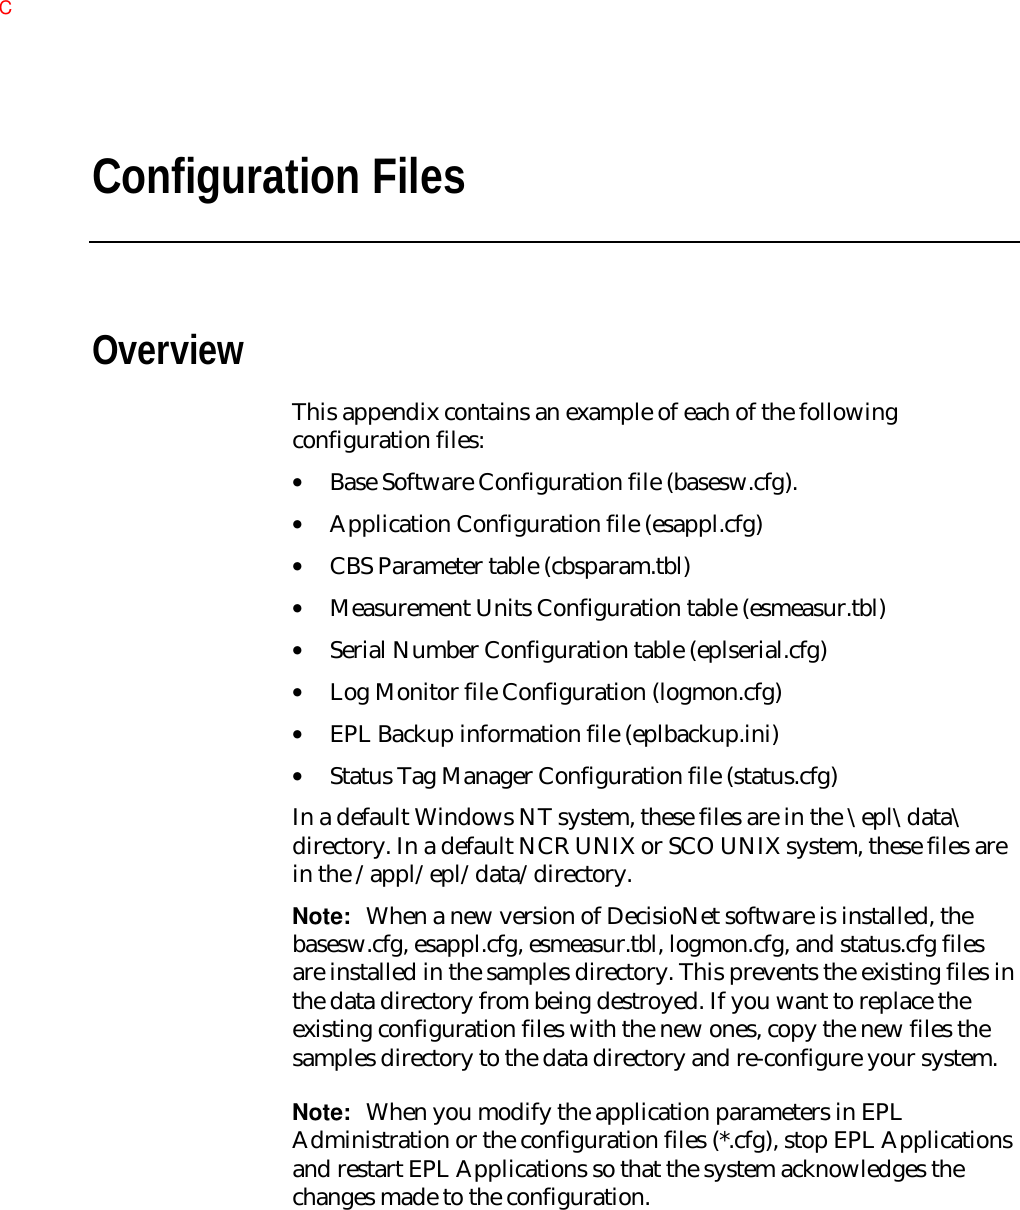 Configuration FilesOverviewThis appendix contains an example of each of the followingconfiguration files:• Base Software Configuration file (basesw.cfg).• Application Configuration file (esappl.cfg)• CBS Parameter table (cbsparam.tbl)• Measurement Units Configuration table (esmeasur.tbl)• Serial Number Configuration table (eplserial.cfg)• Log Monitor file Configuration (logmon.cfg)• EPL Backup information file (eplbackup.ini)• Status Tag Manager Configuration file (status.cfg)In a default Windows NT system, these files are in the \epl\data\directory. In a default NCR UNIX or SCO UNIX system, these files arein the /appl/epl/data/directory.Note:  When a new version of DecisioNet software is installed, thebasesw.cfg, esappl.cfg, esmeasur.tbl, logmon.cfg, and status.cfg filesare installed in the samples directory. This prevents the existing files inthe data directory from being destroyed. If you want to replace theexisting configuration files with the new ones, copy the new files thesamples directory to the data directory and re-configure your system.Note:  When you modify the application parameters in EPLAdministration or the configuration files (*.cfg), stop EPL Applicationsand restart EPL Applications so that the system acknowledges thechanges made to the configuration.C